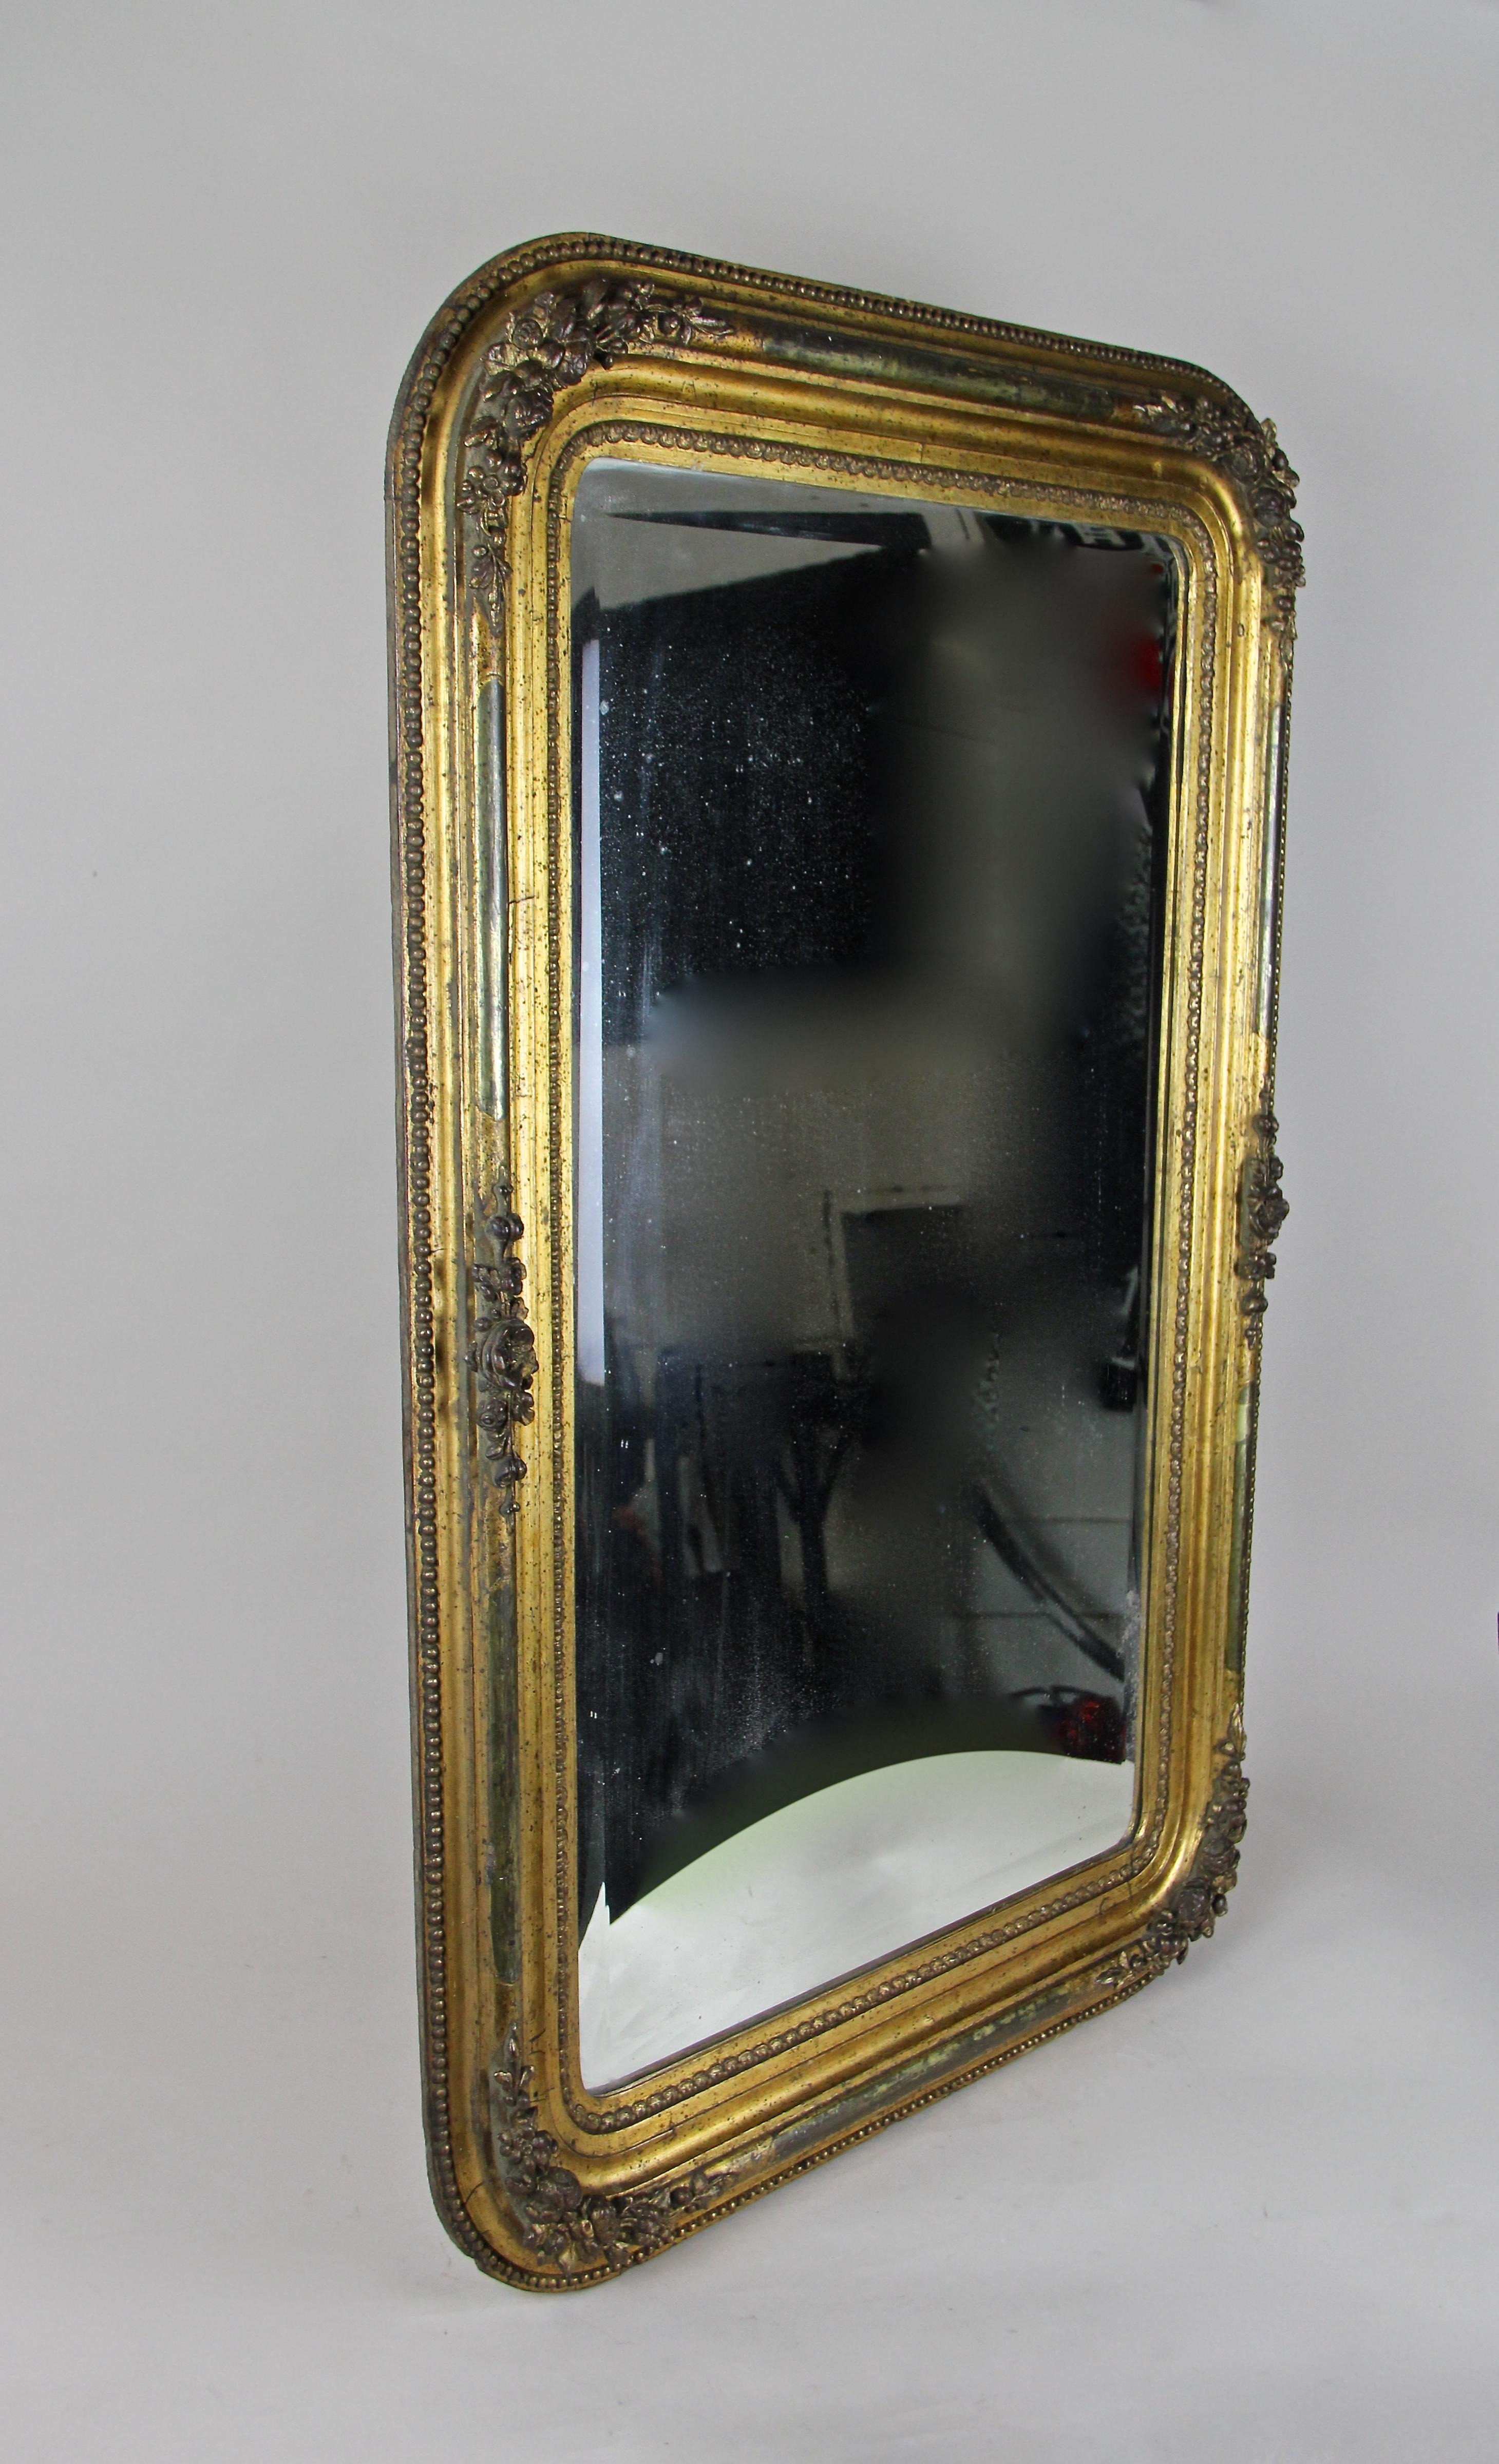 Charming gilt Biedermeier wall mirror from the period around 1840 in Austria. Standing out with its lovely floral stucco work, silver plated half rods (abraded) and rounded corners, this frame was restored by our experts while taking greatest care